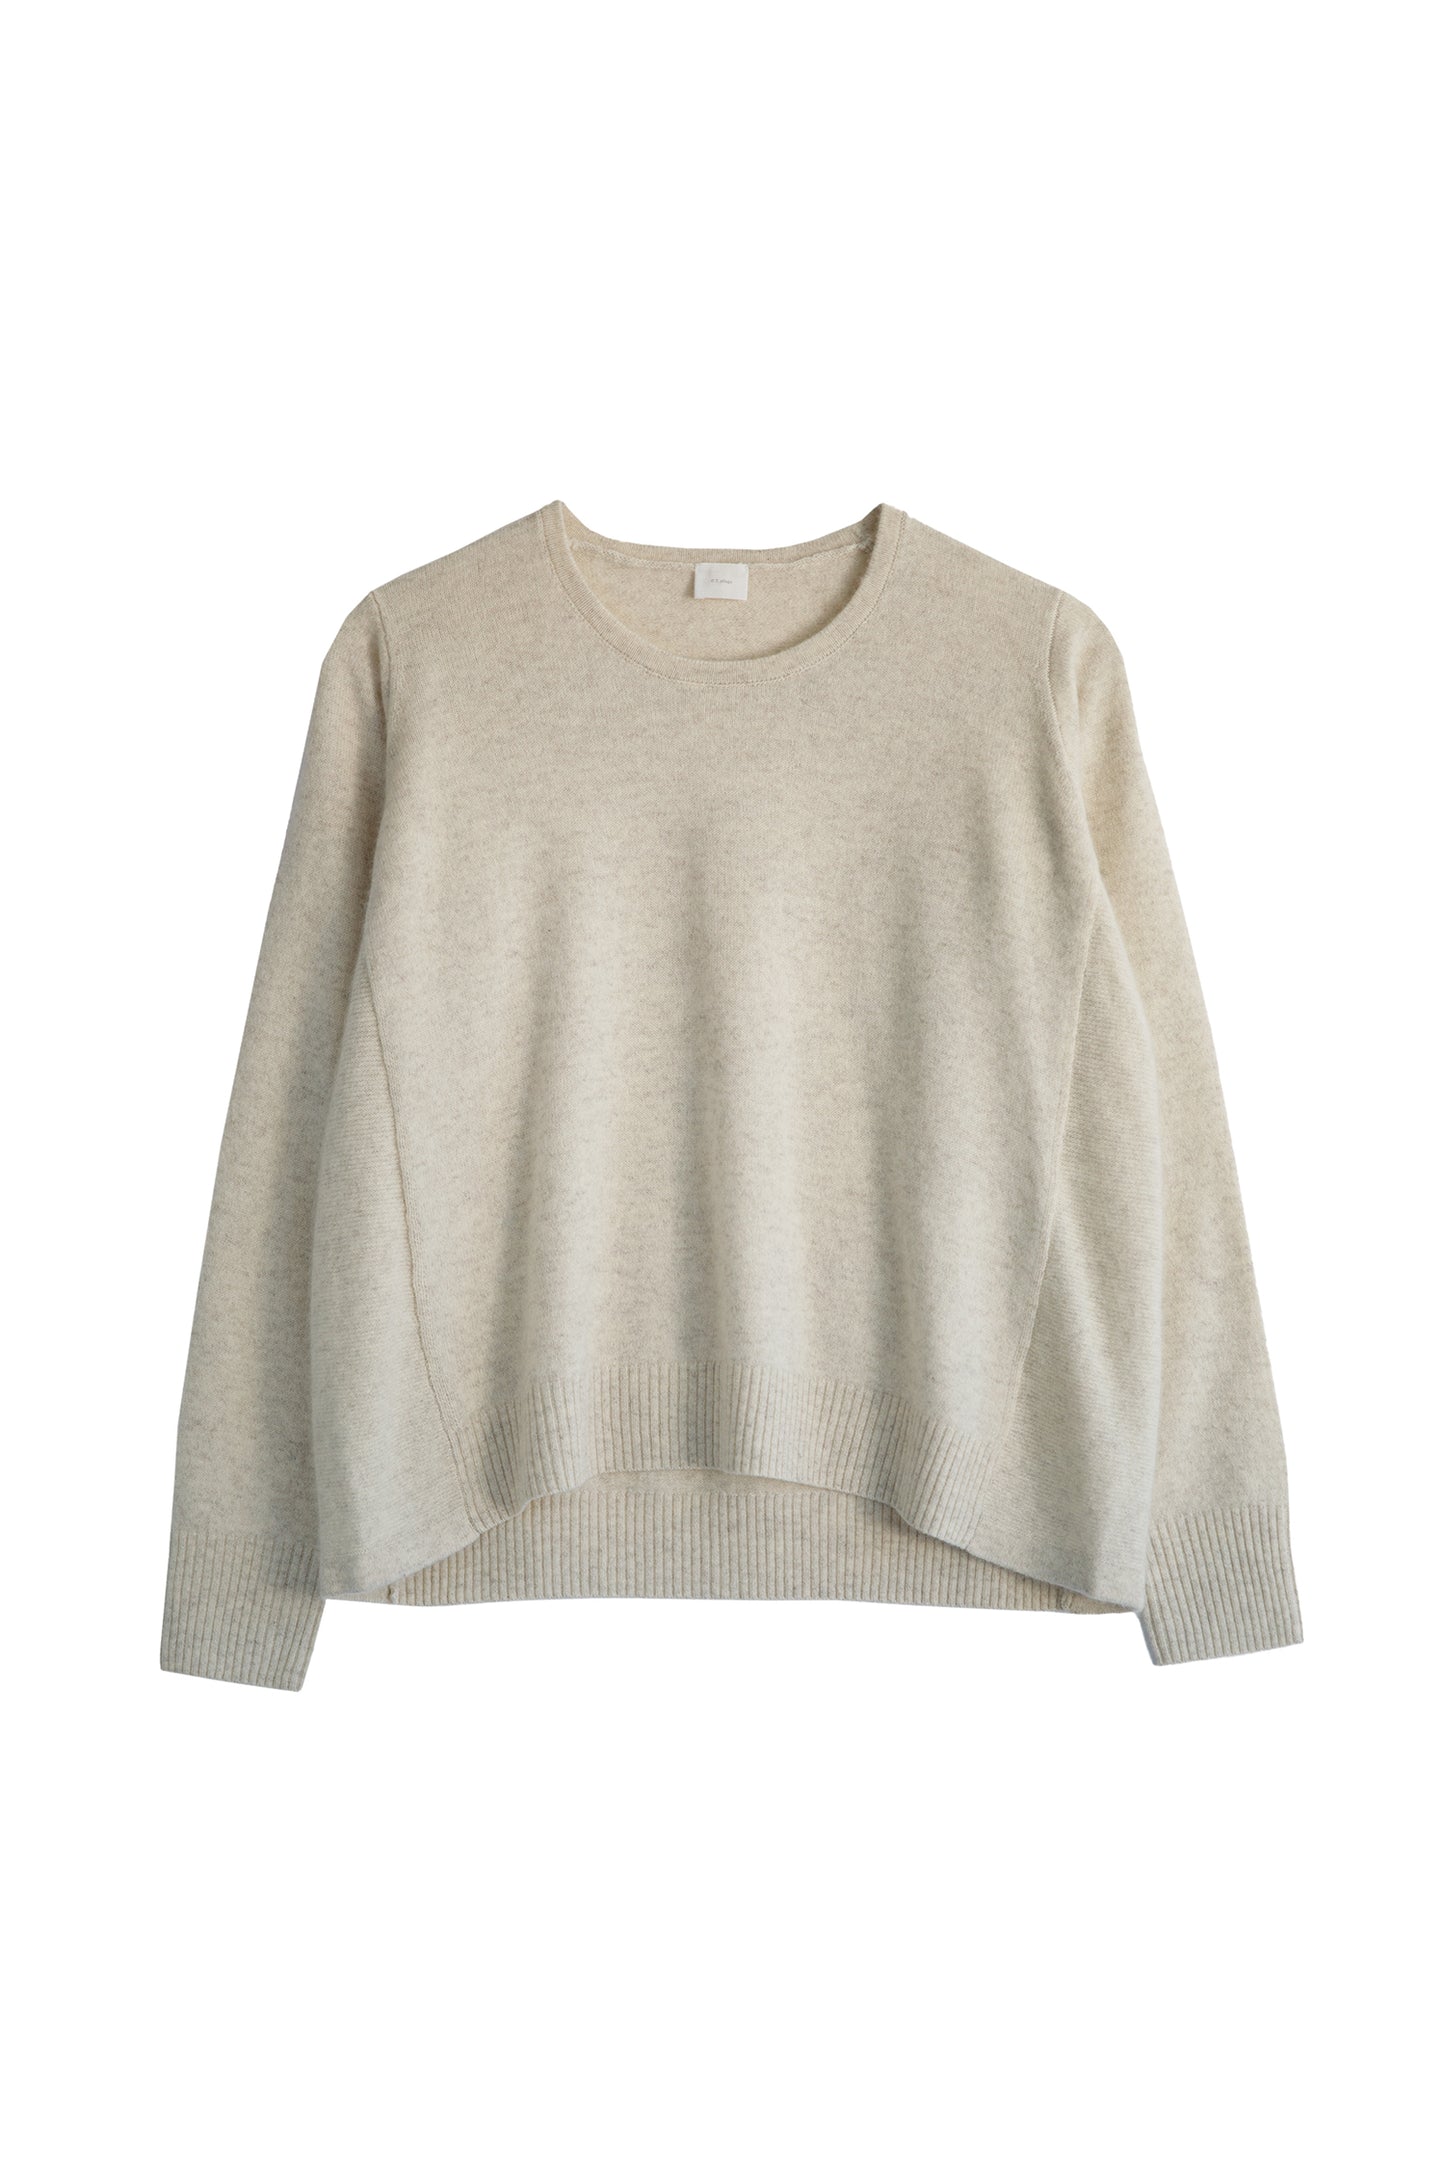 23AW Cashmere raccoon crew neck pullover /CT23332